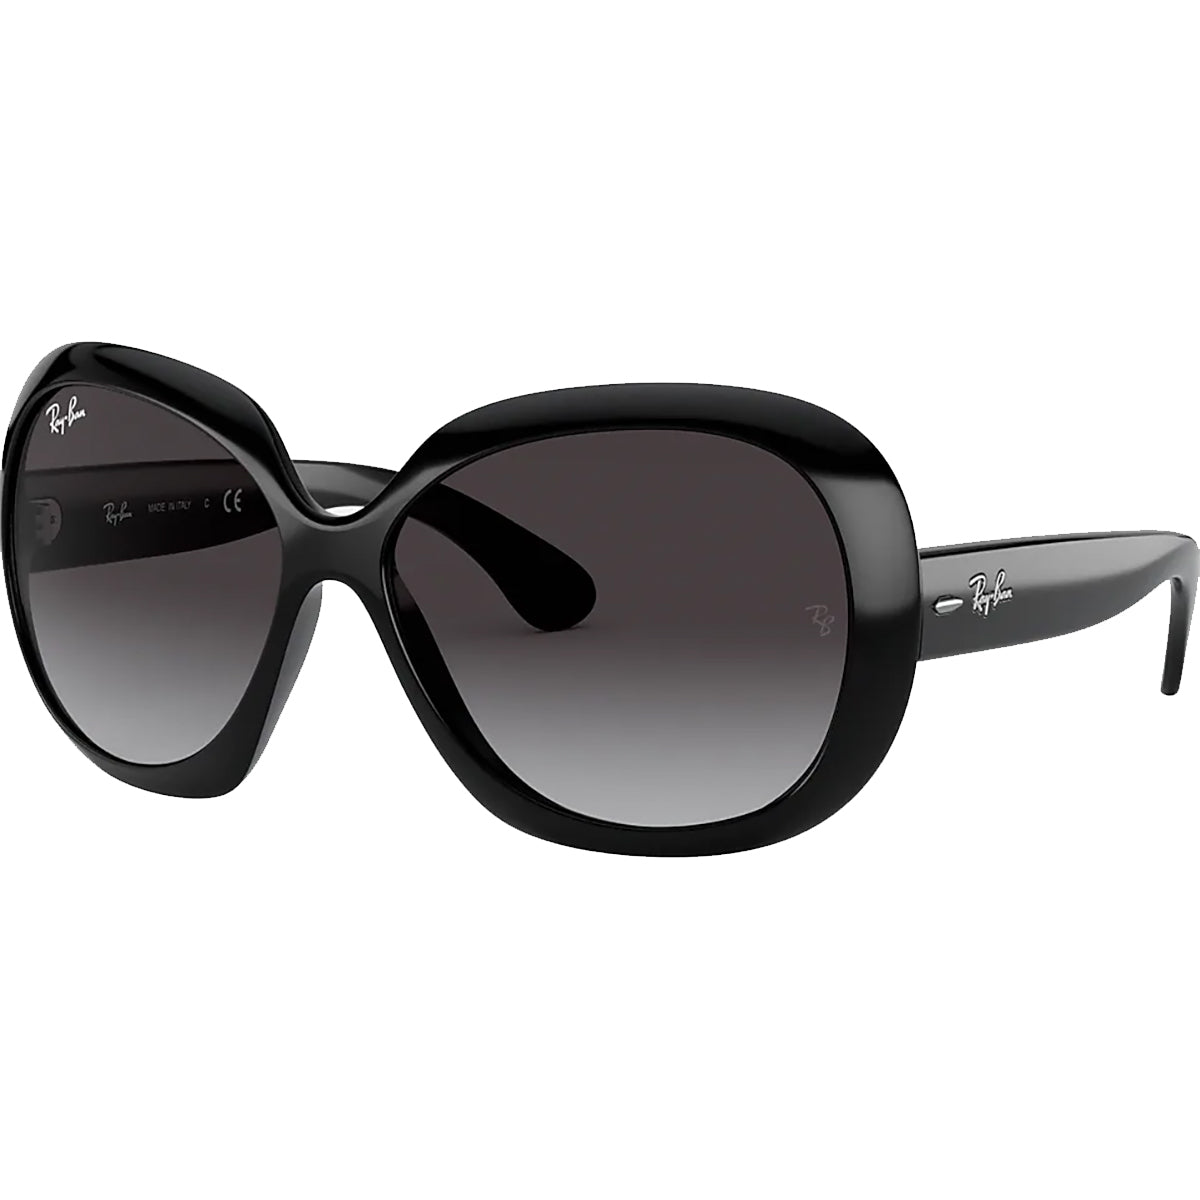 Ray-Ban Jackie Ohh II Women's Lifestyle Sunglasses-0RB4098